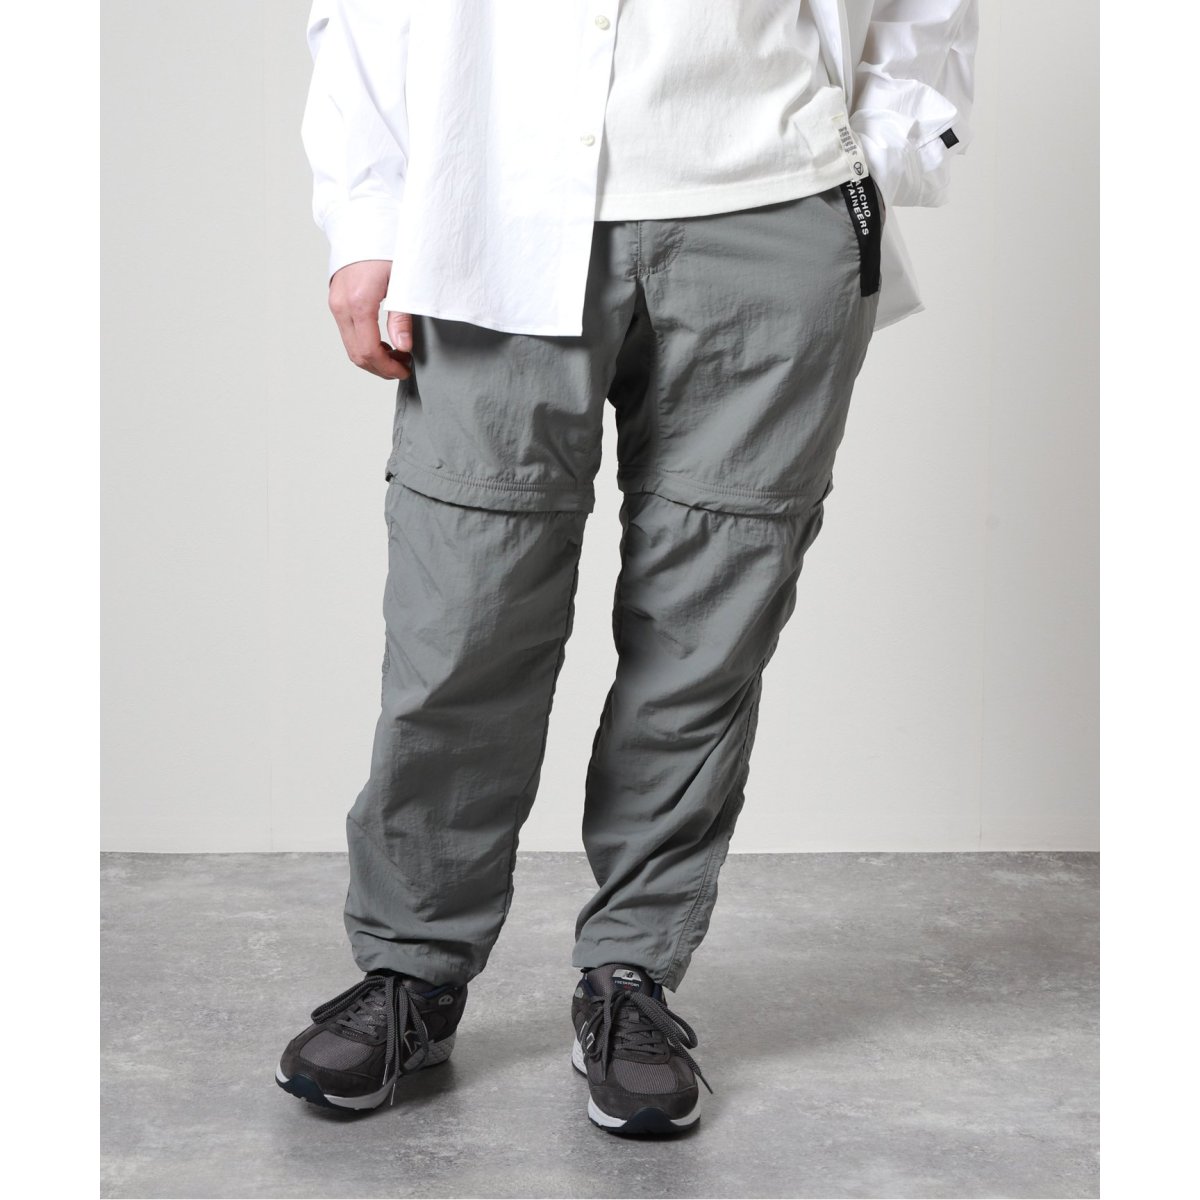 【MOUNTAIN RESEARCH/マウンテンリサーチ】I.D.Pants Plus